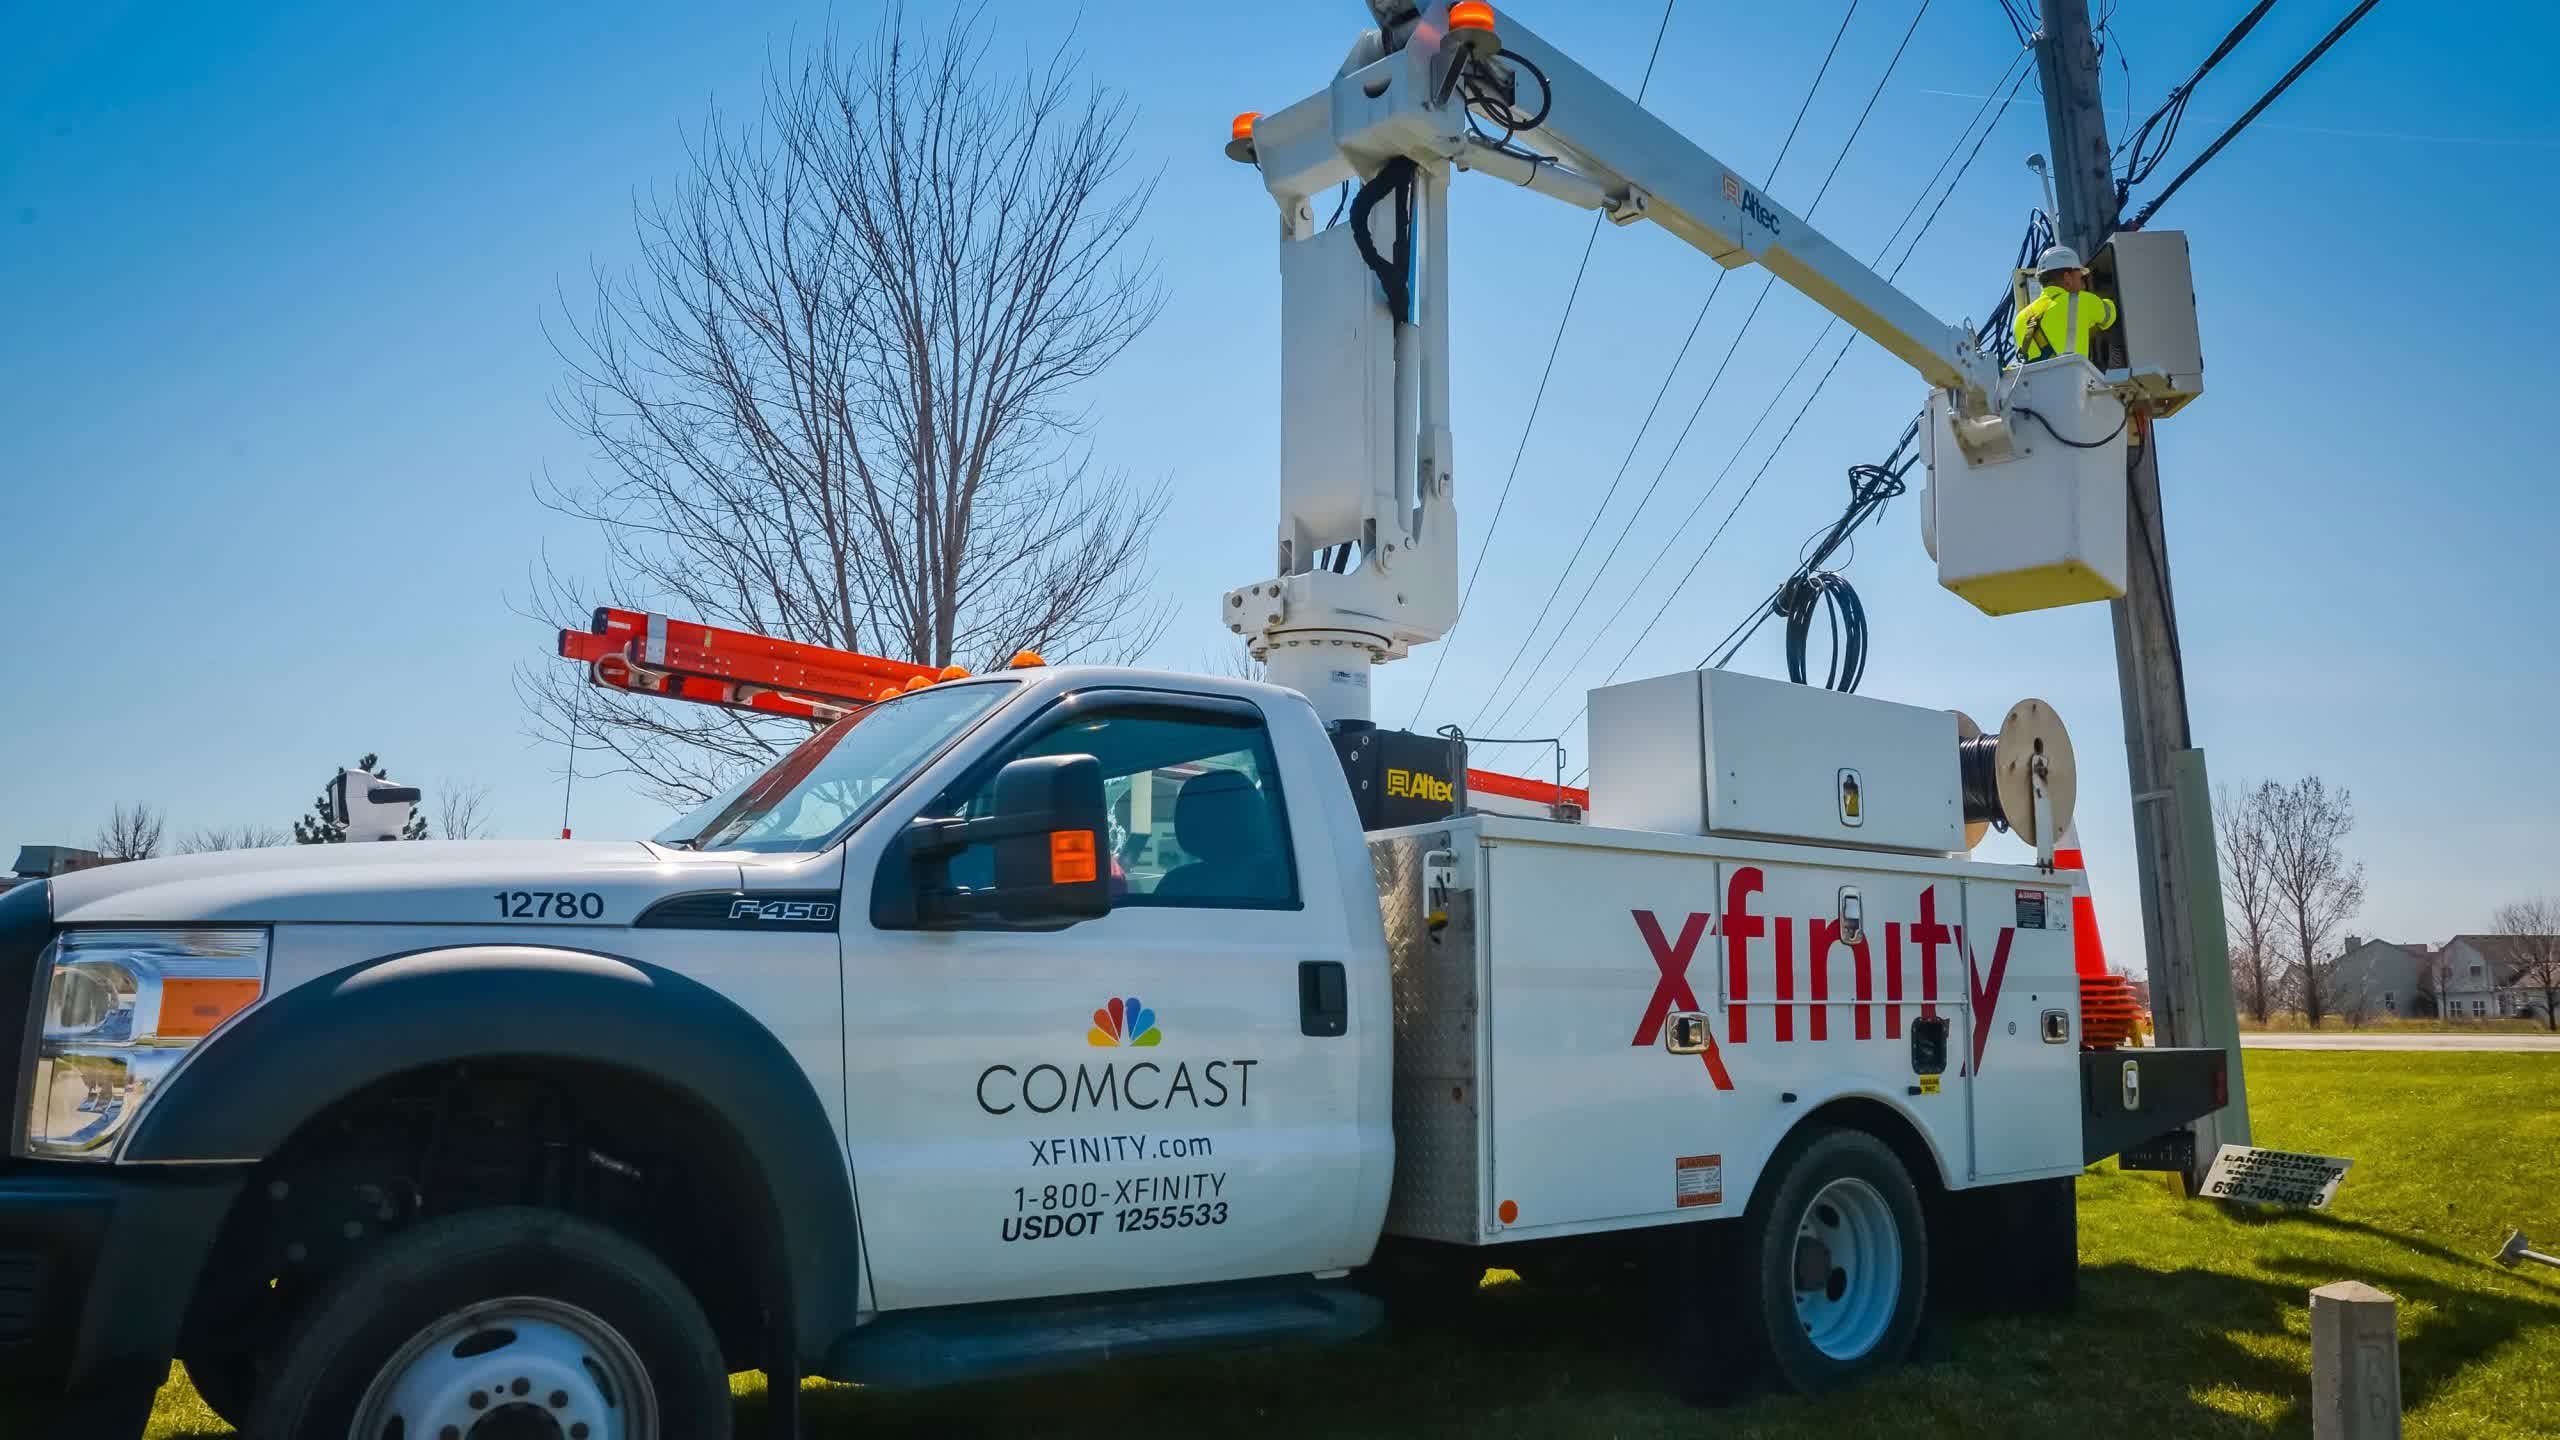 Comcast becomes the latest ISP caught providing false coverage data to the FCC